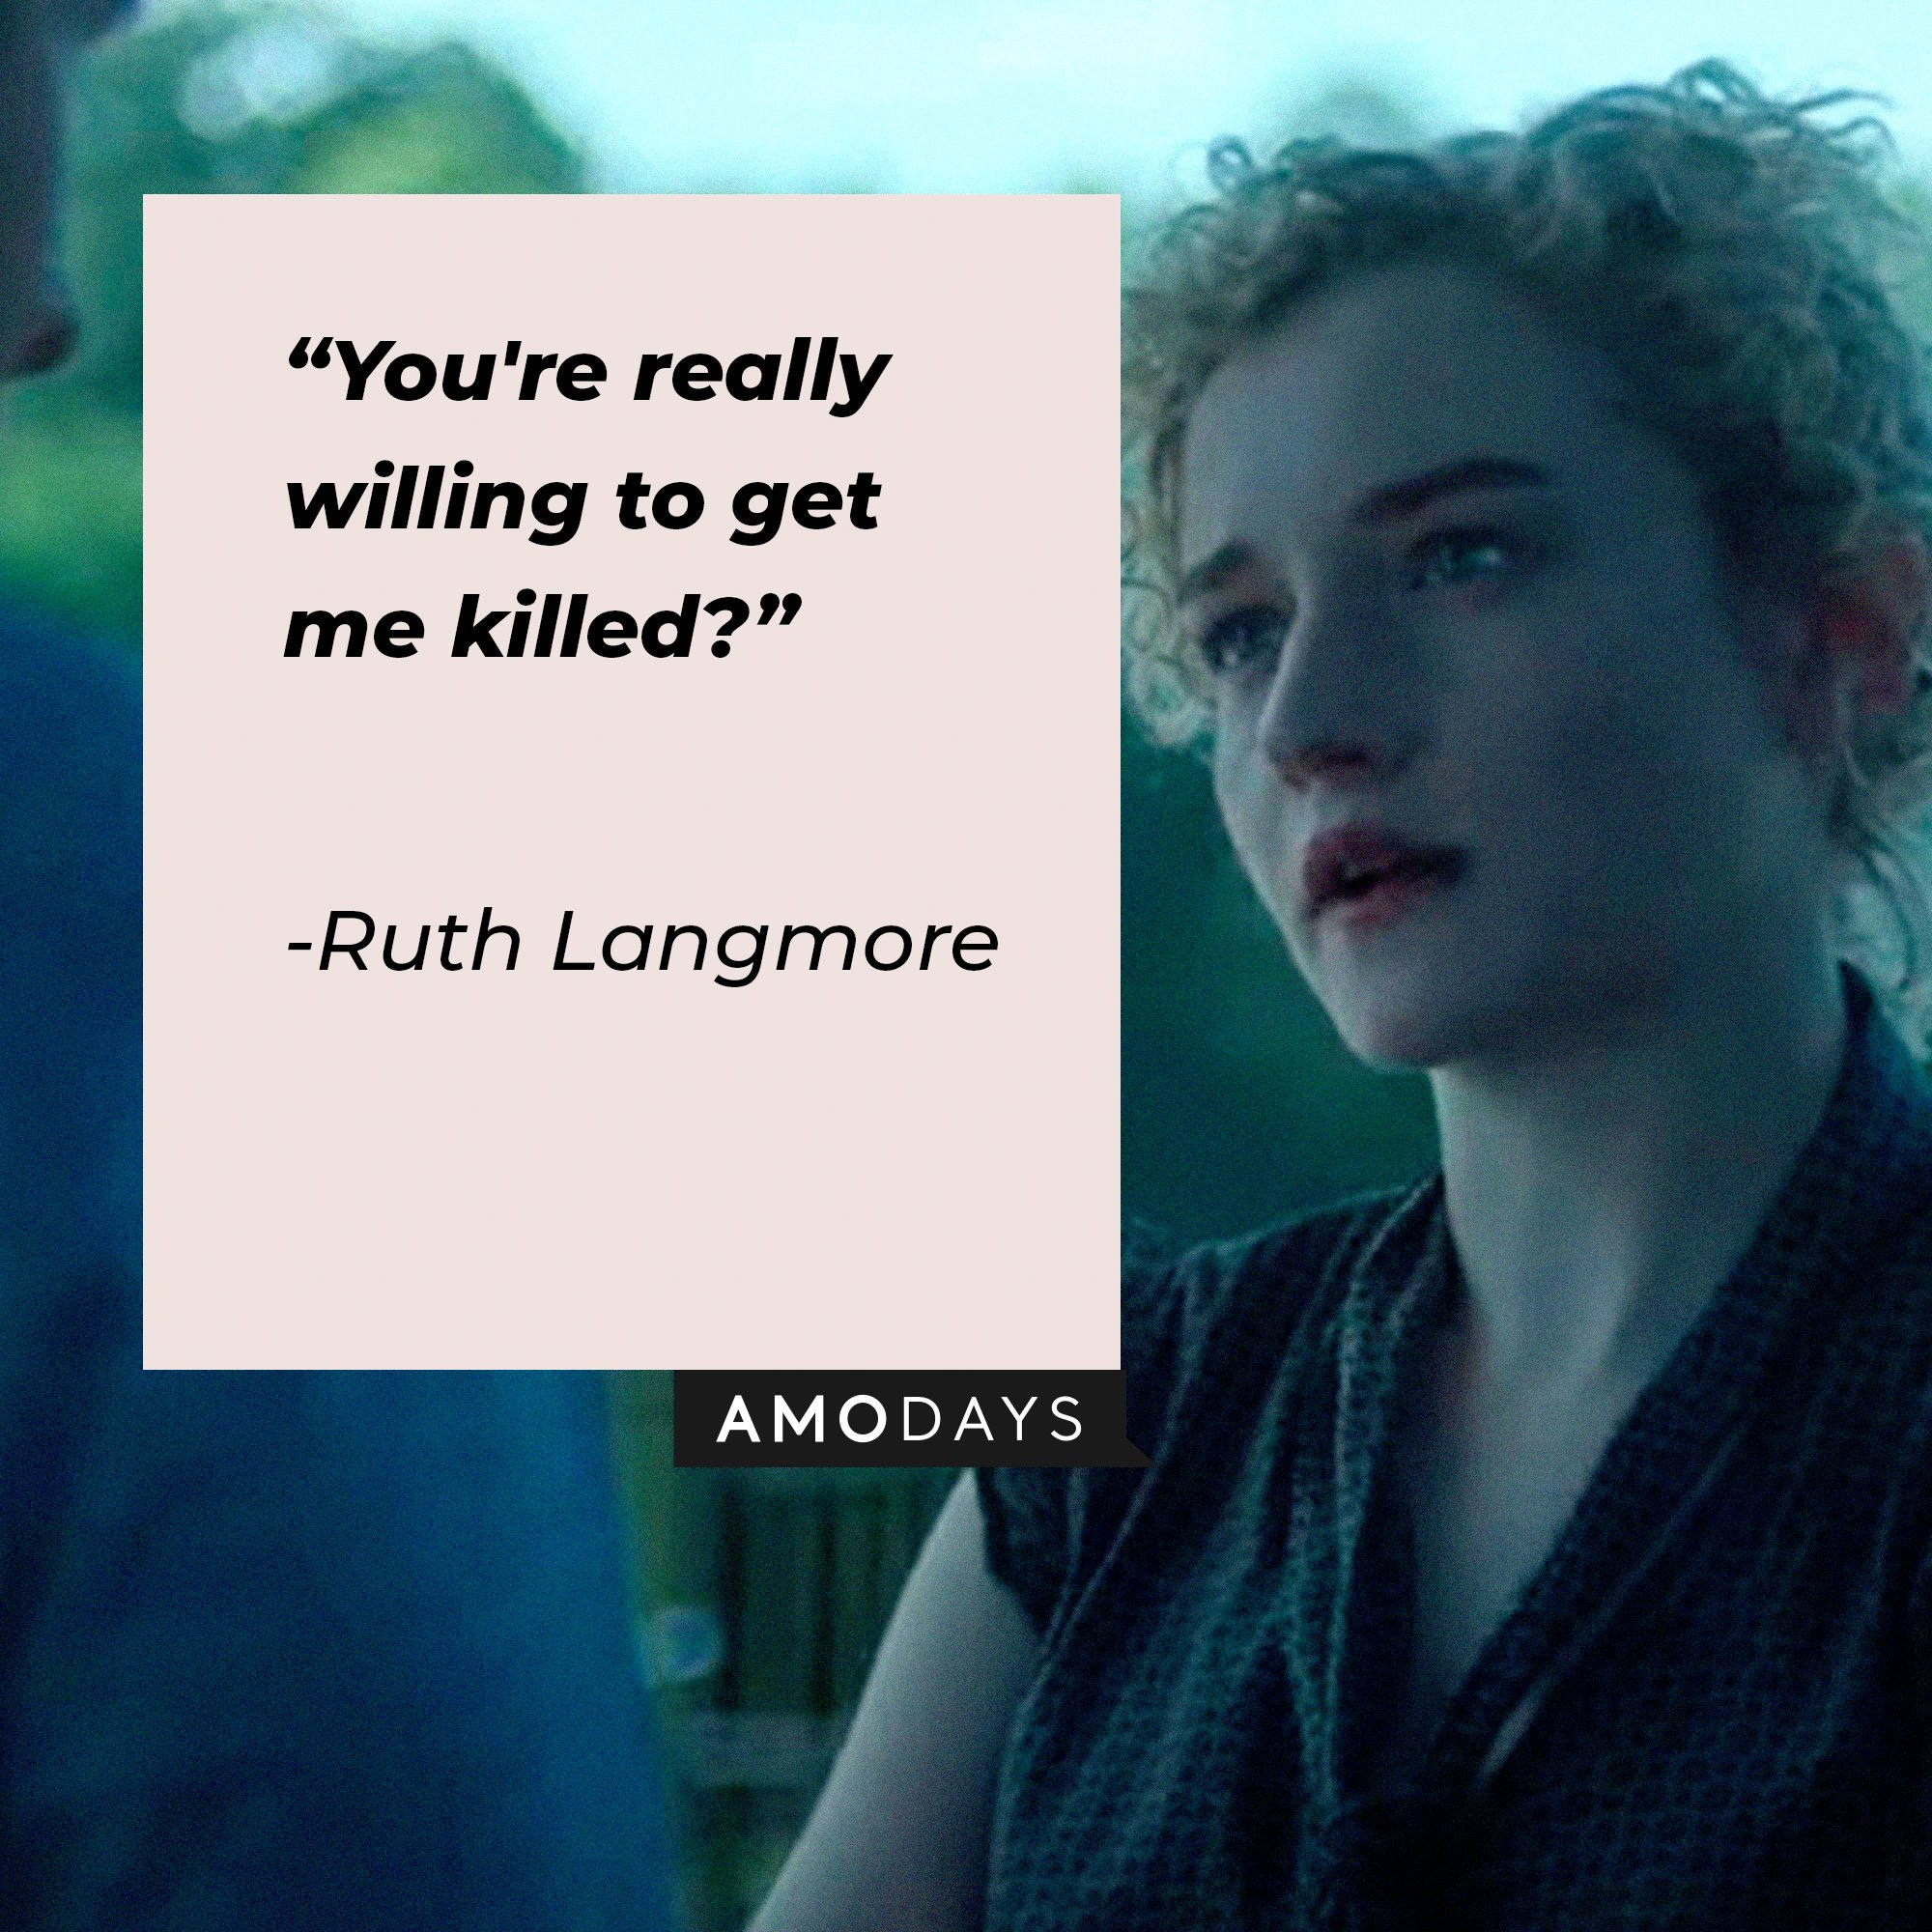 Ruth Langmore’s quote: “You're really willing to get me killed?” | Image: AmoDays